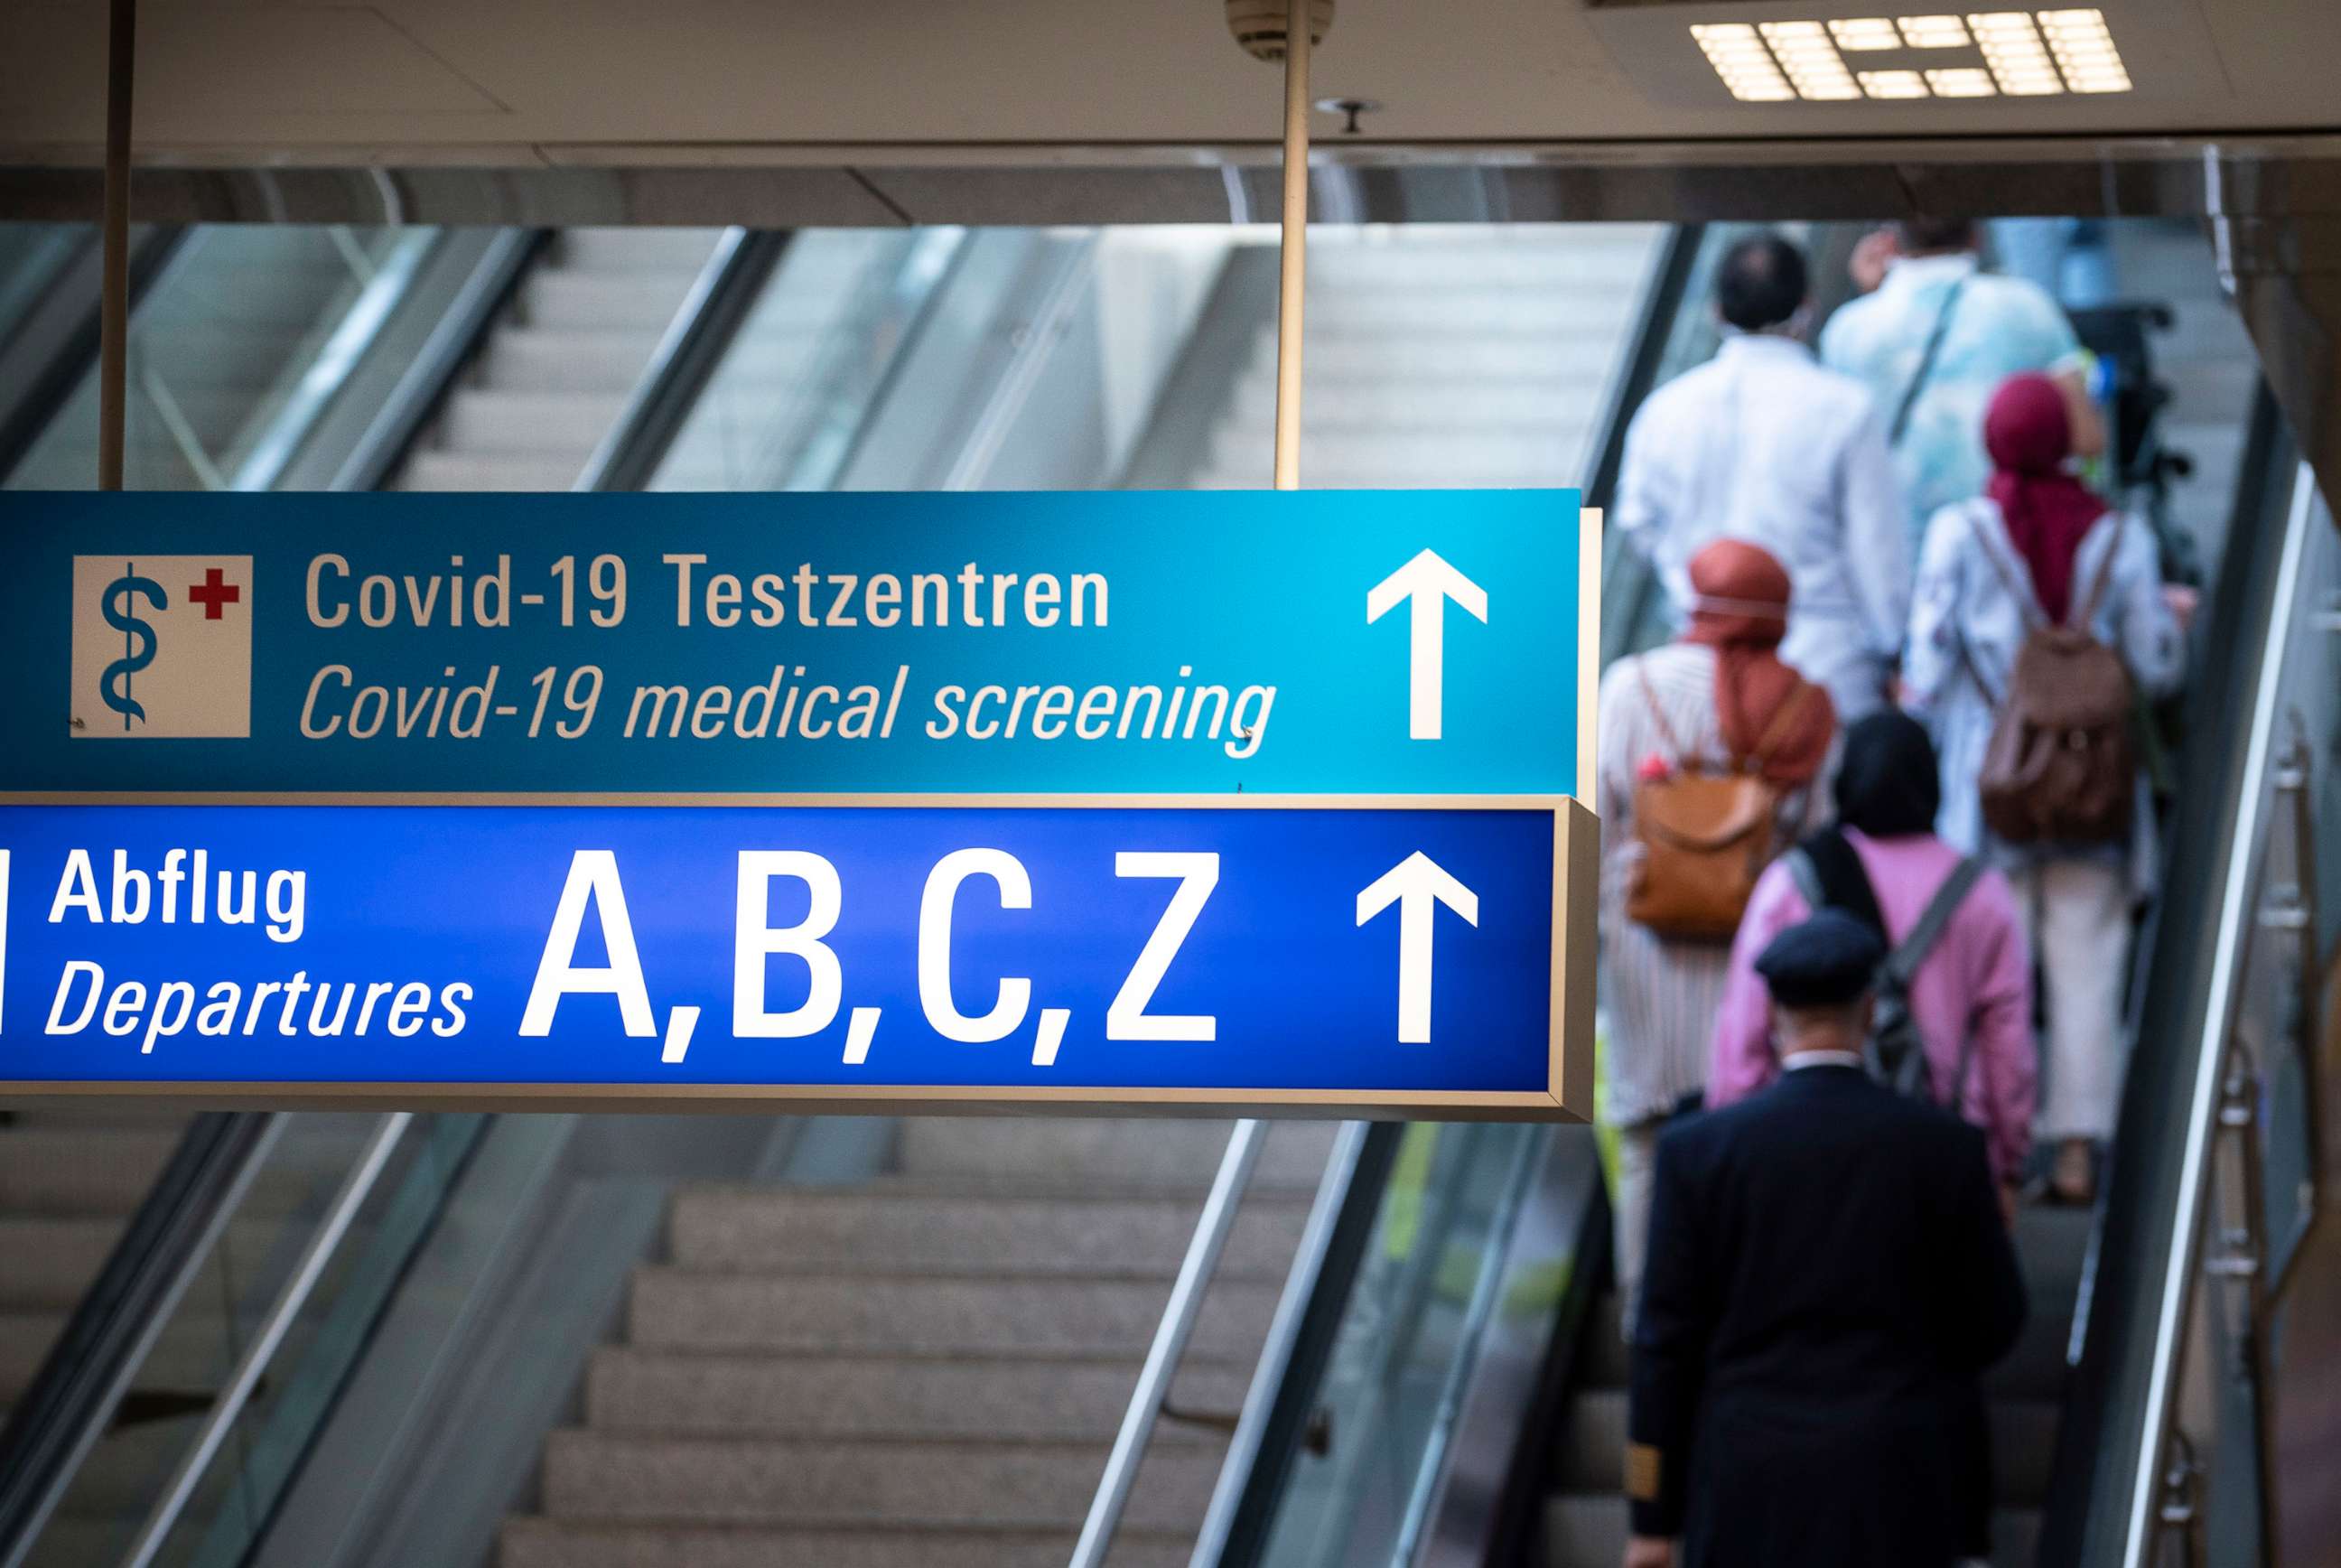 PHOTO: A sign in the arrivals area of Frankfurt Airport shows the way to departures and the Covid-19 test centers, Aug. 15, 2020.